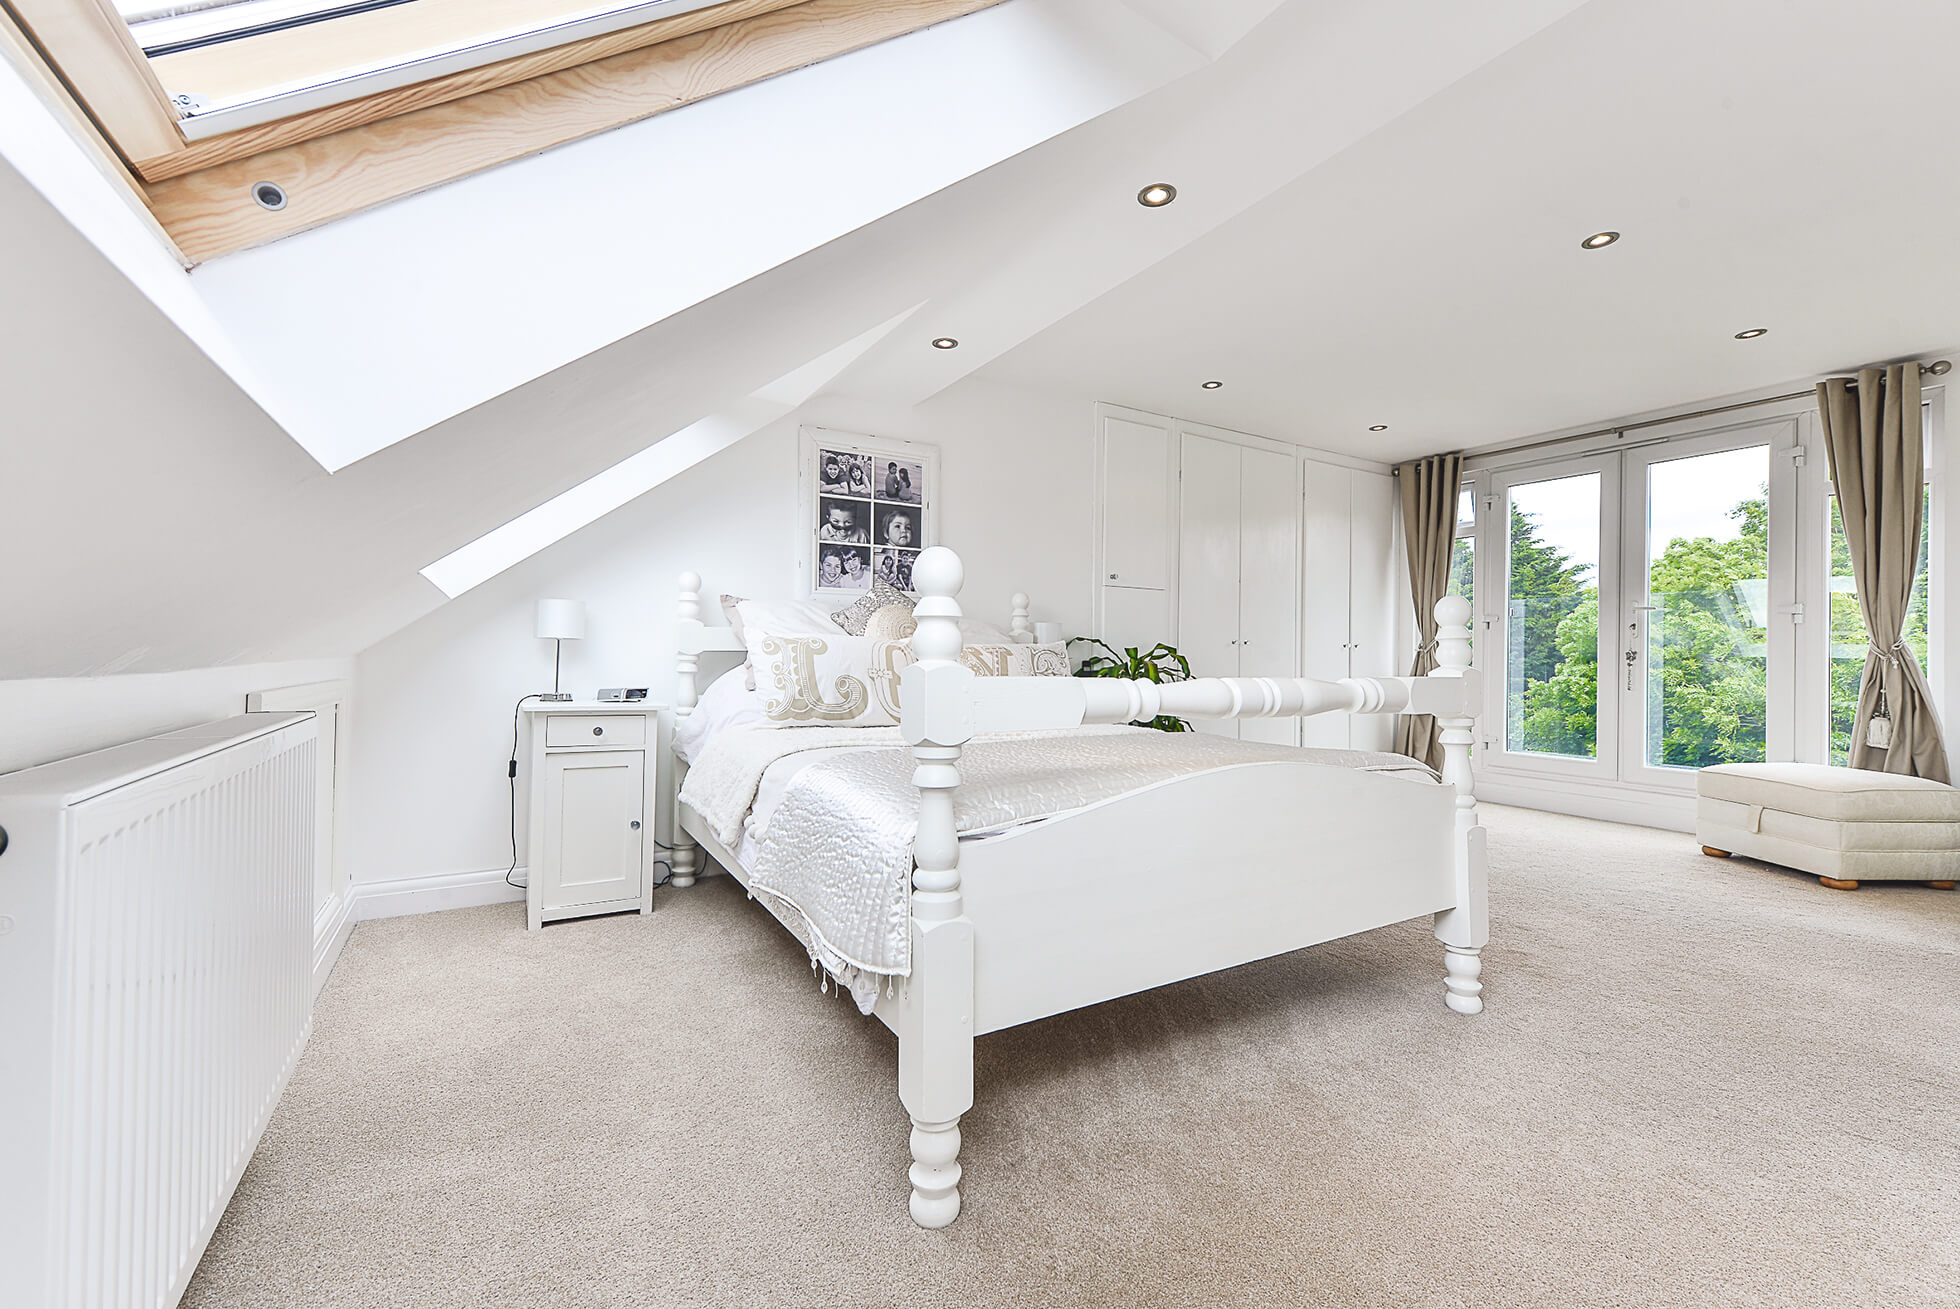 Do you have a question about converting your Loft in Kings Langley? Here are the most popular questions asked by our clients.